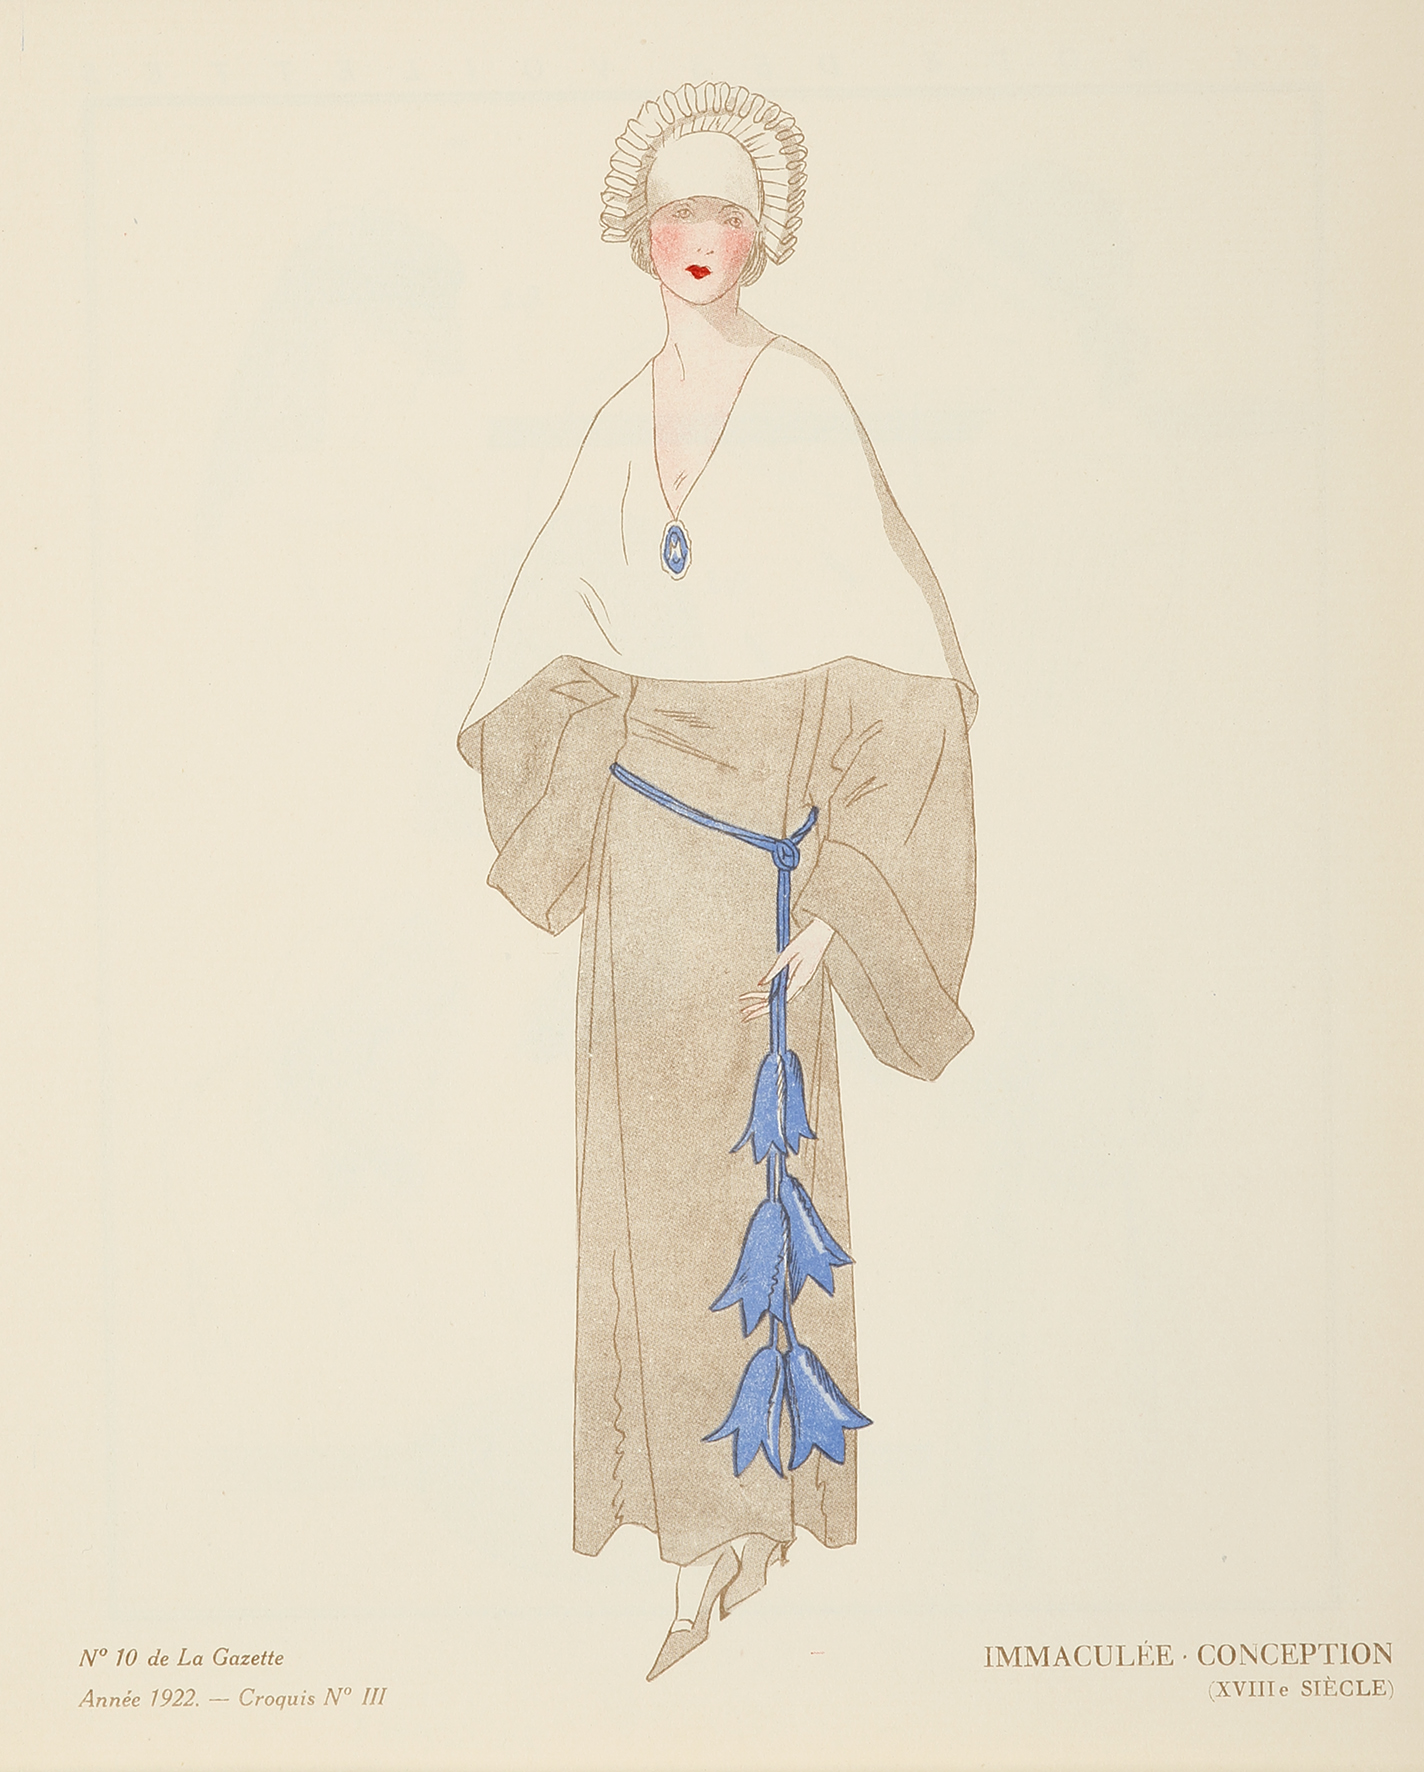 Immaculee Conception - Vintage Print from 1922